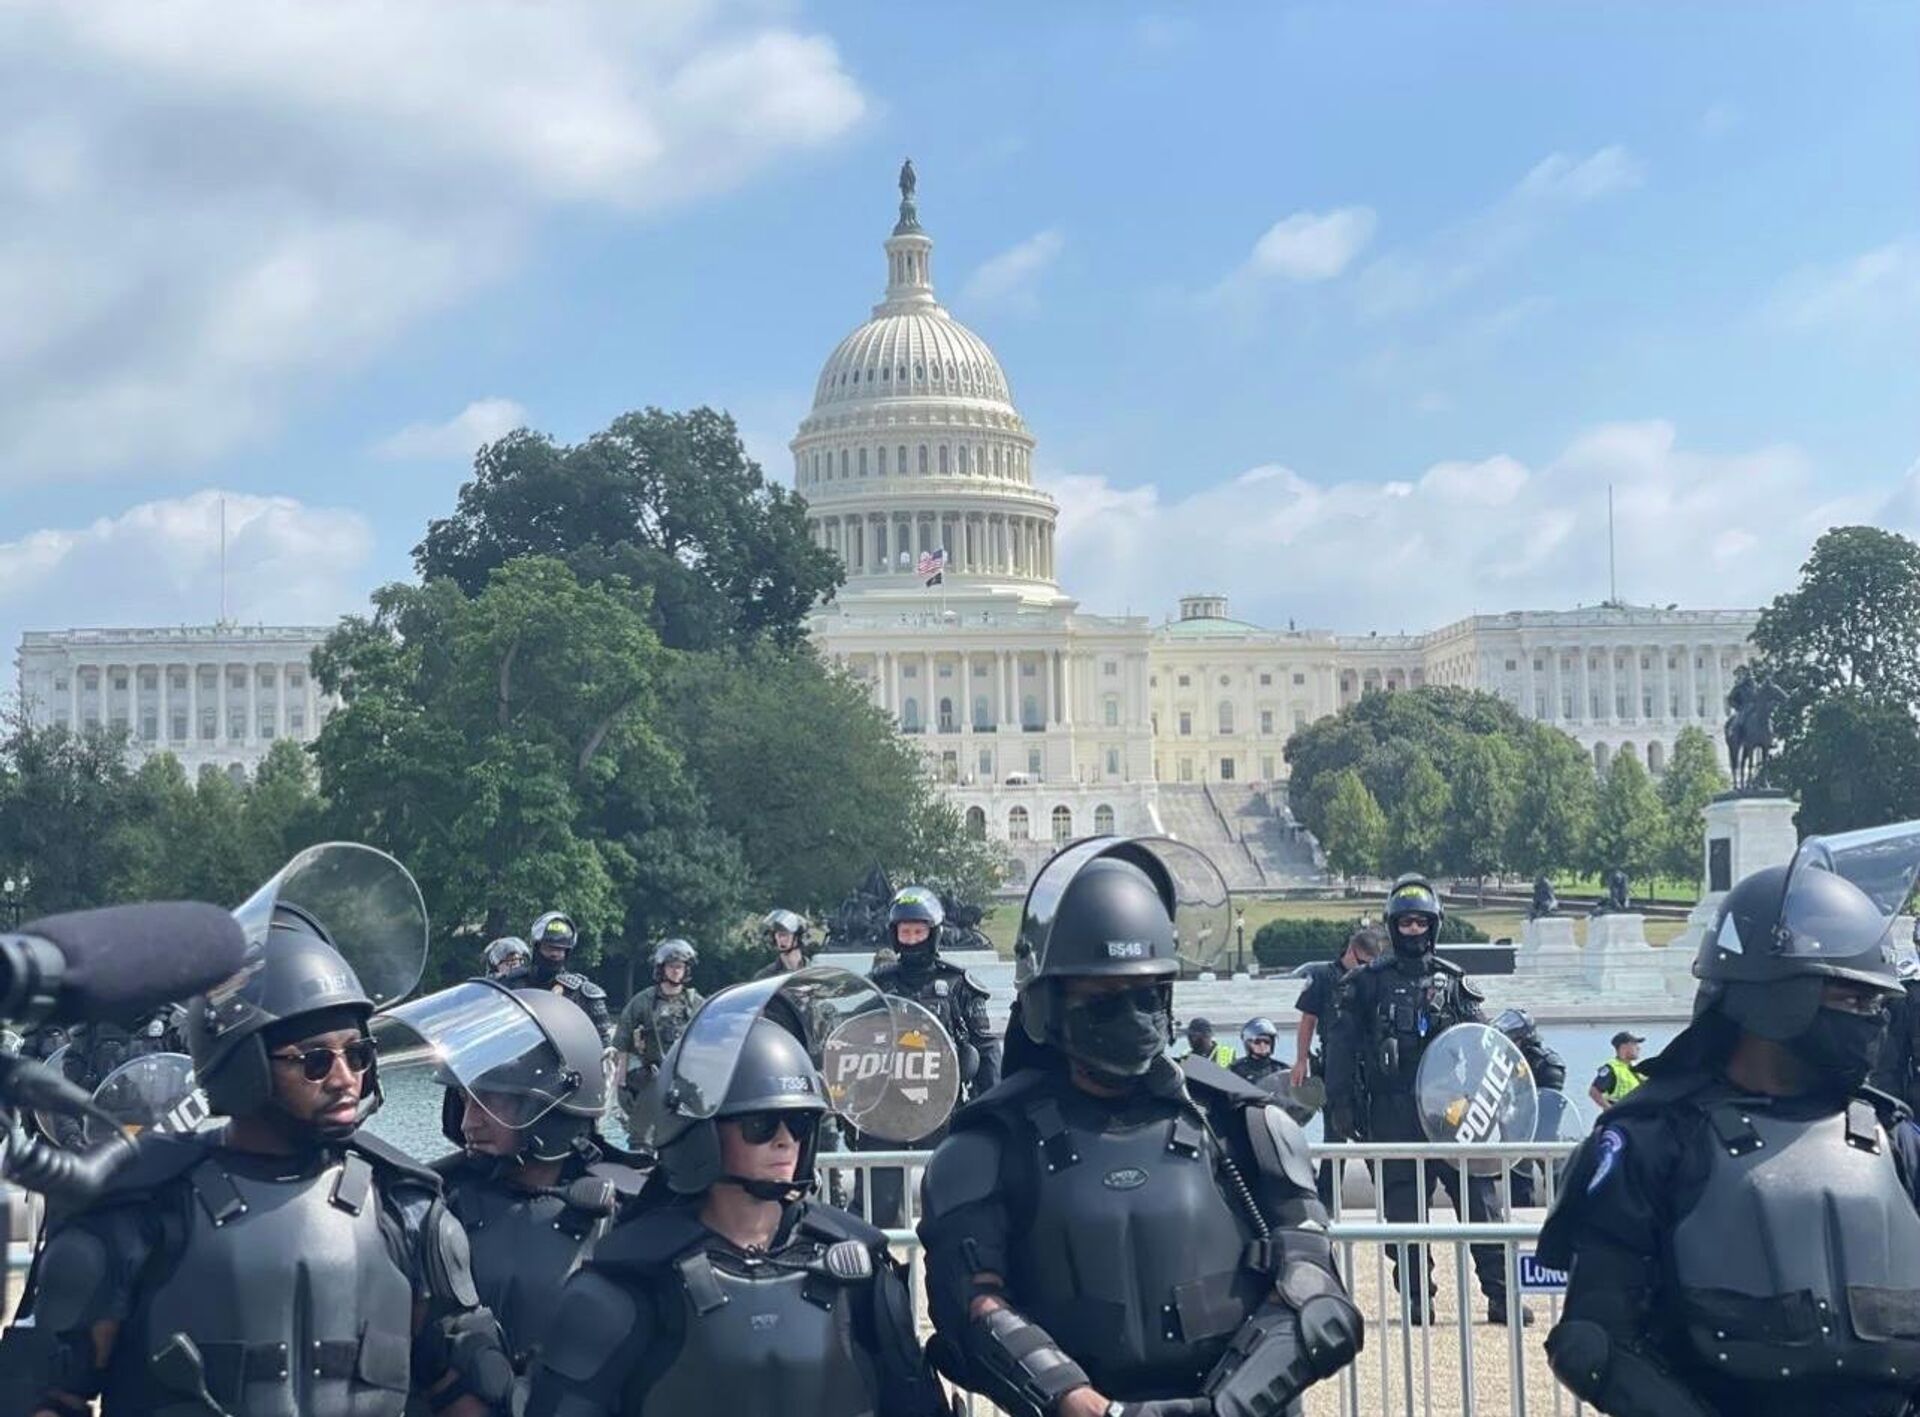 People gathered in DC on September 18 to participate in the Justice for J6 rally in support of people arrested after the January 6 riot - Sputnik International, 1920, 05.01.2022